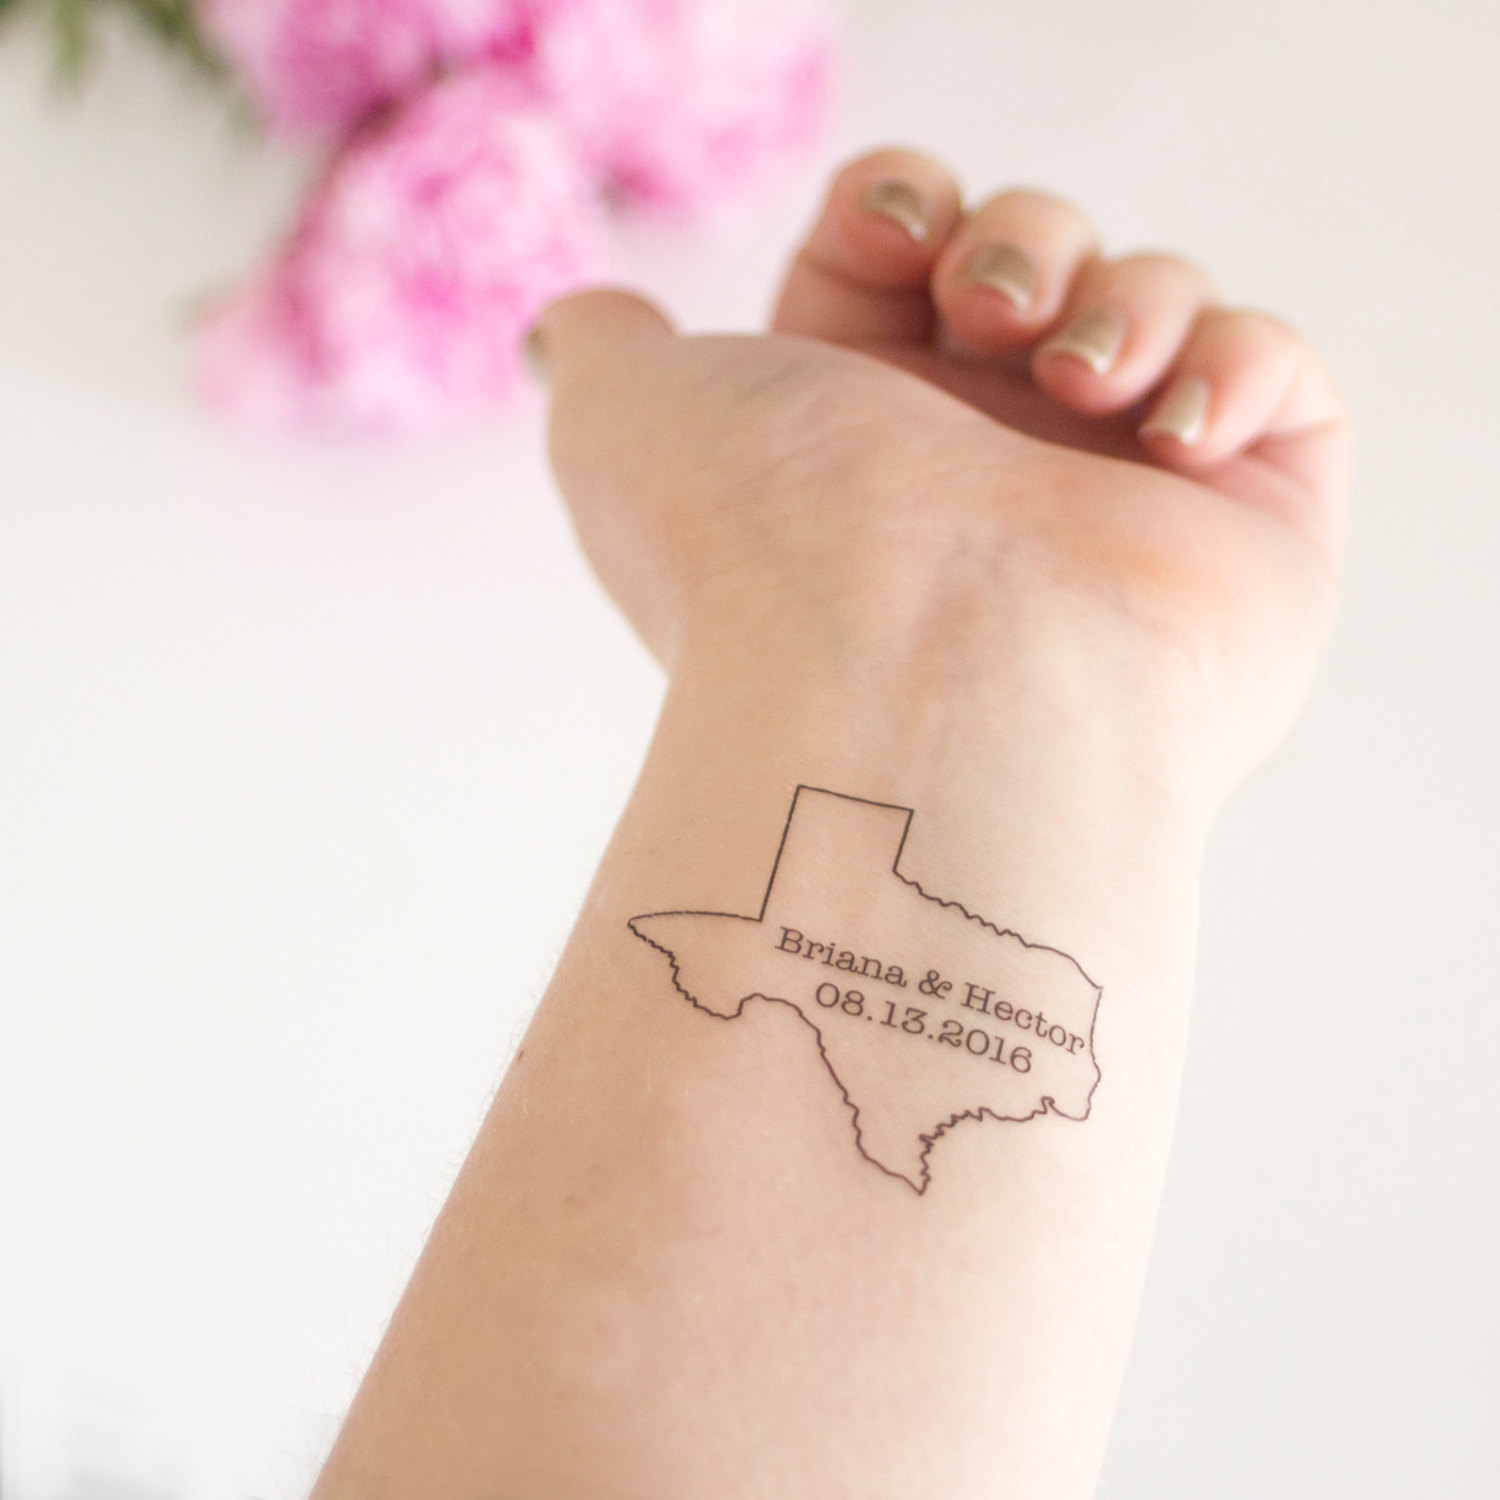 Lettering And Numerals On Texas Map Tattoo On Wrist